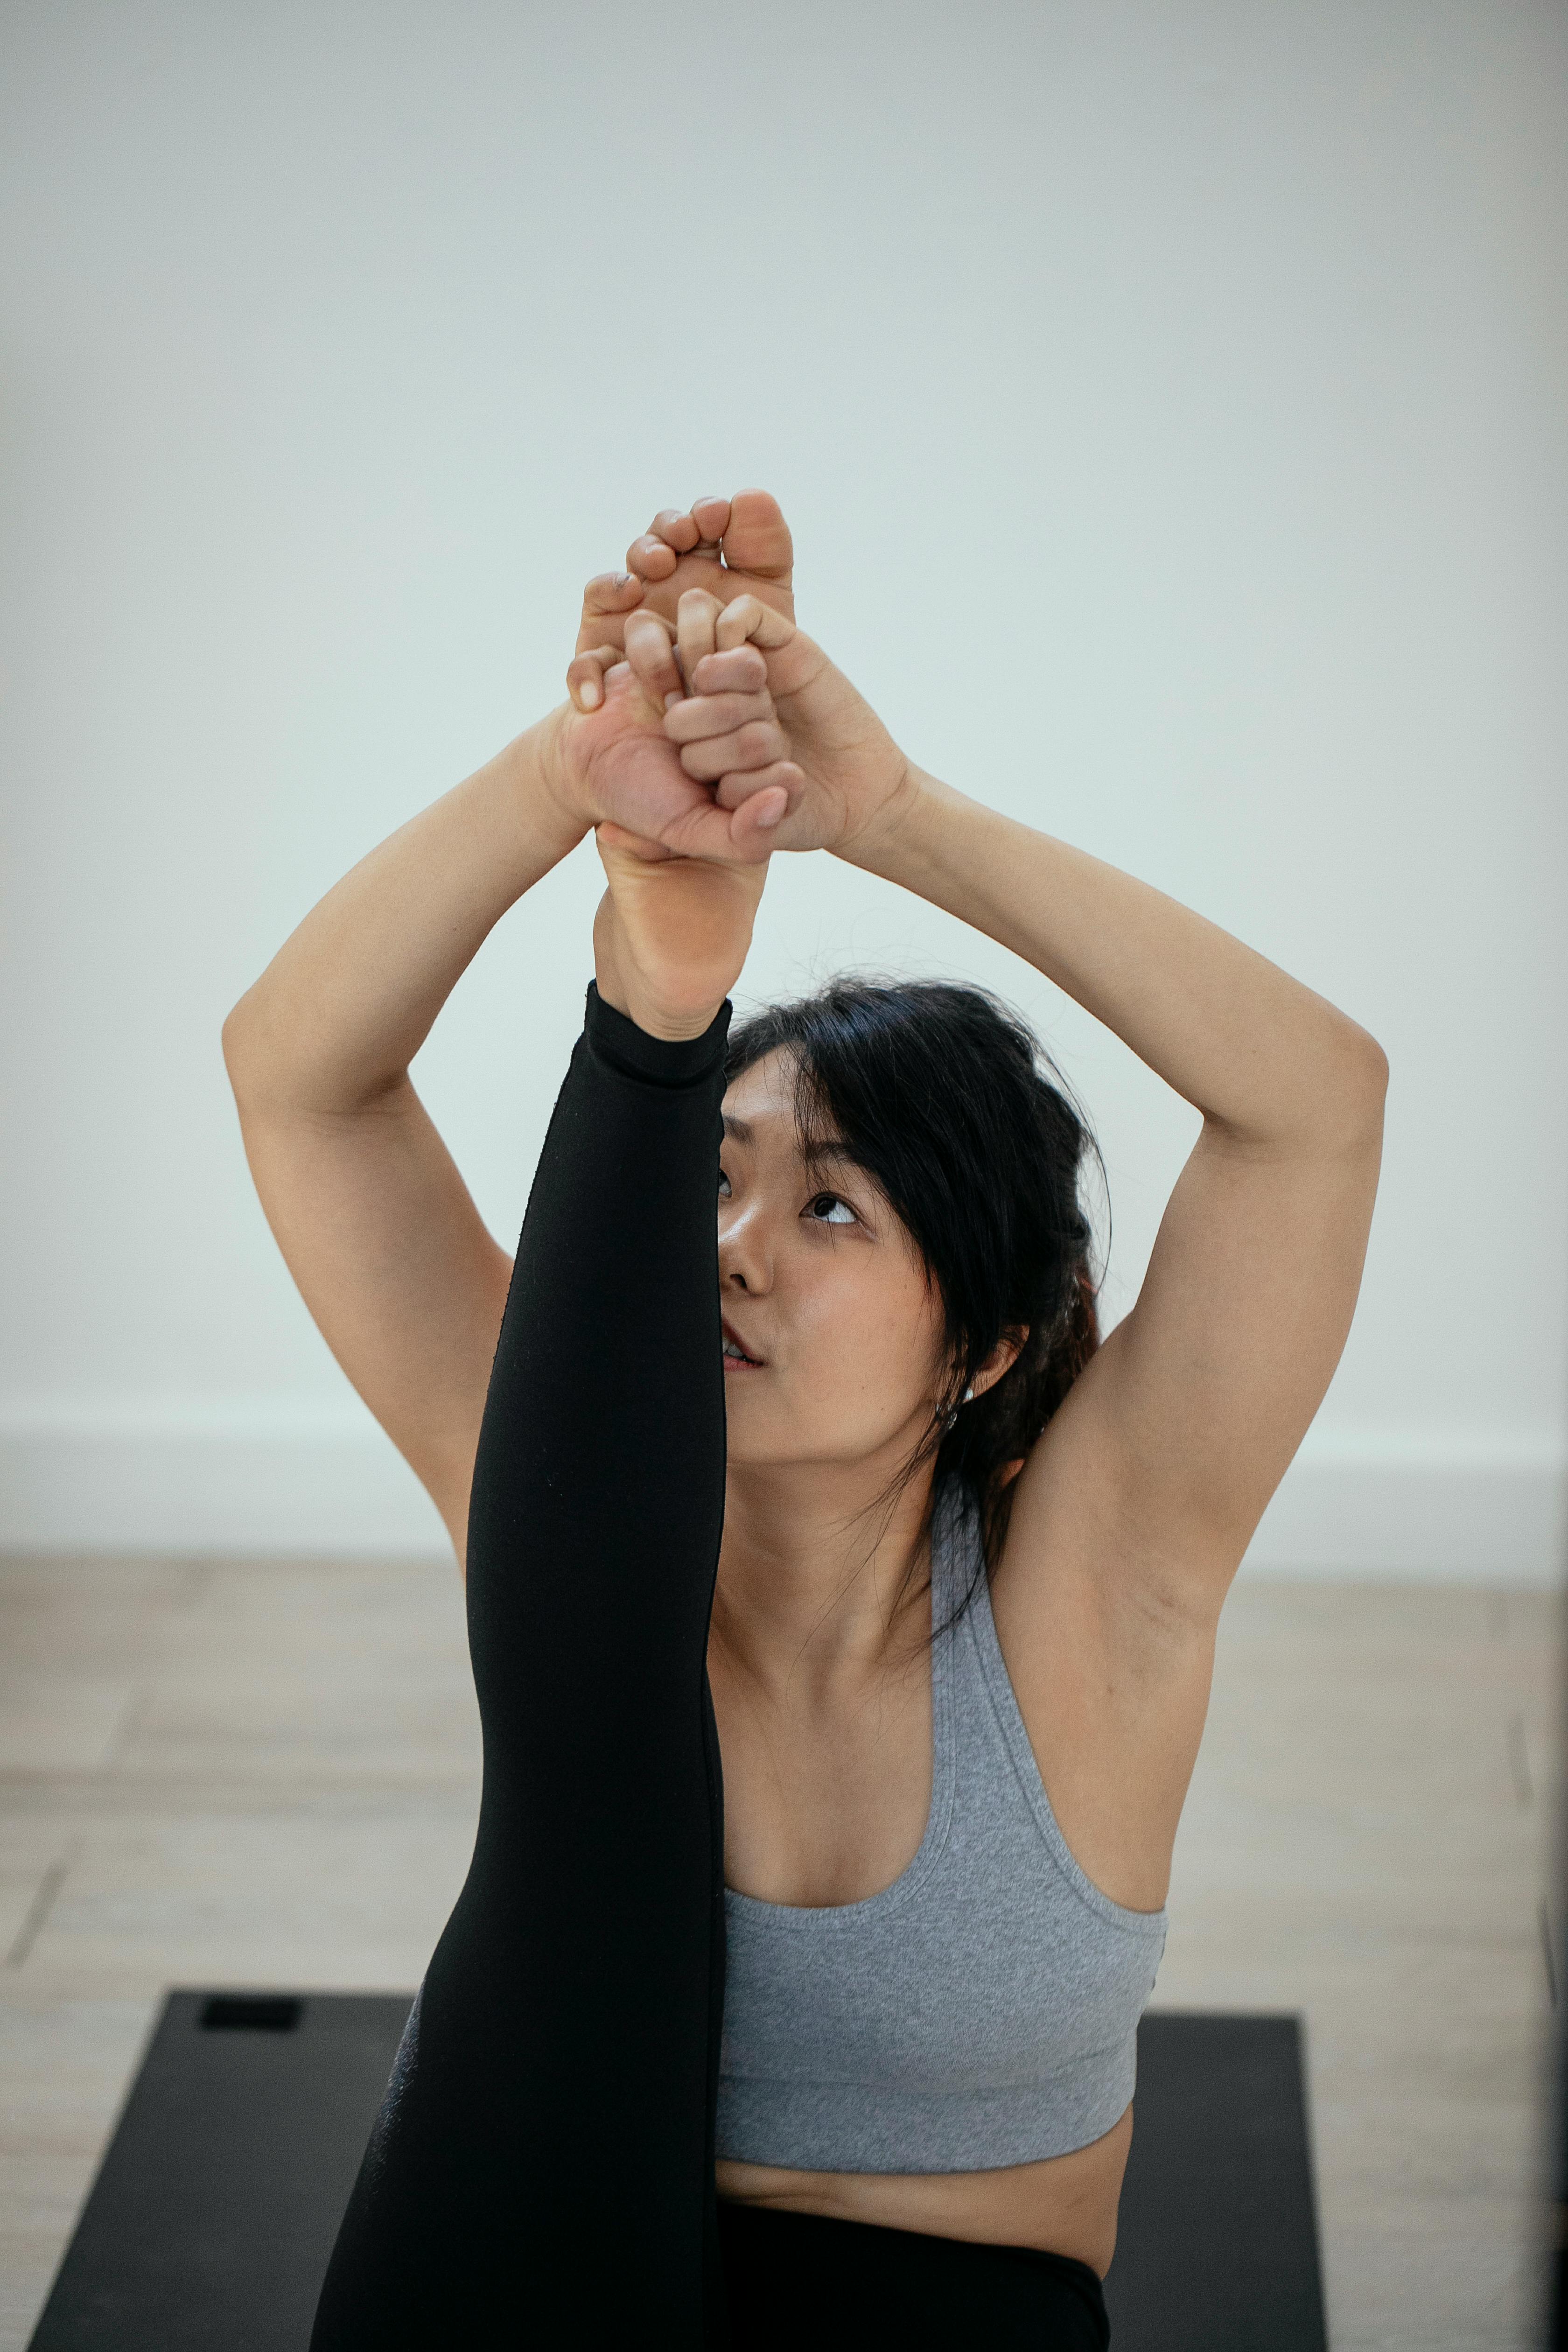 Tummee.com - Learn and teach your students about Raised Arms Pose at  https://www.tummee.com/yoga-poses/raised-arms-pose Level | Beginner  Position | Standing Type | Back-Bend, Stretch Raised Arms Pose is  considered a base pose as